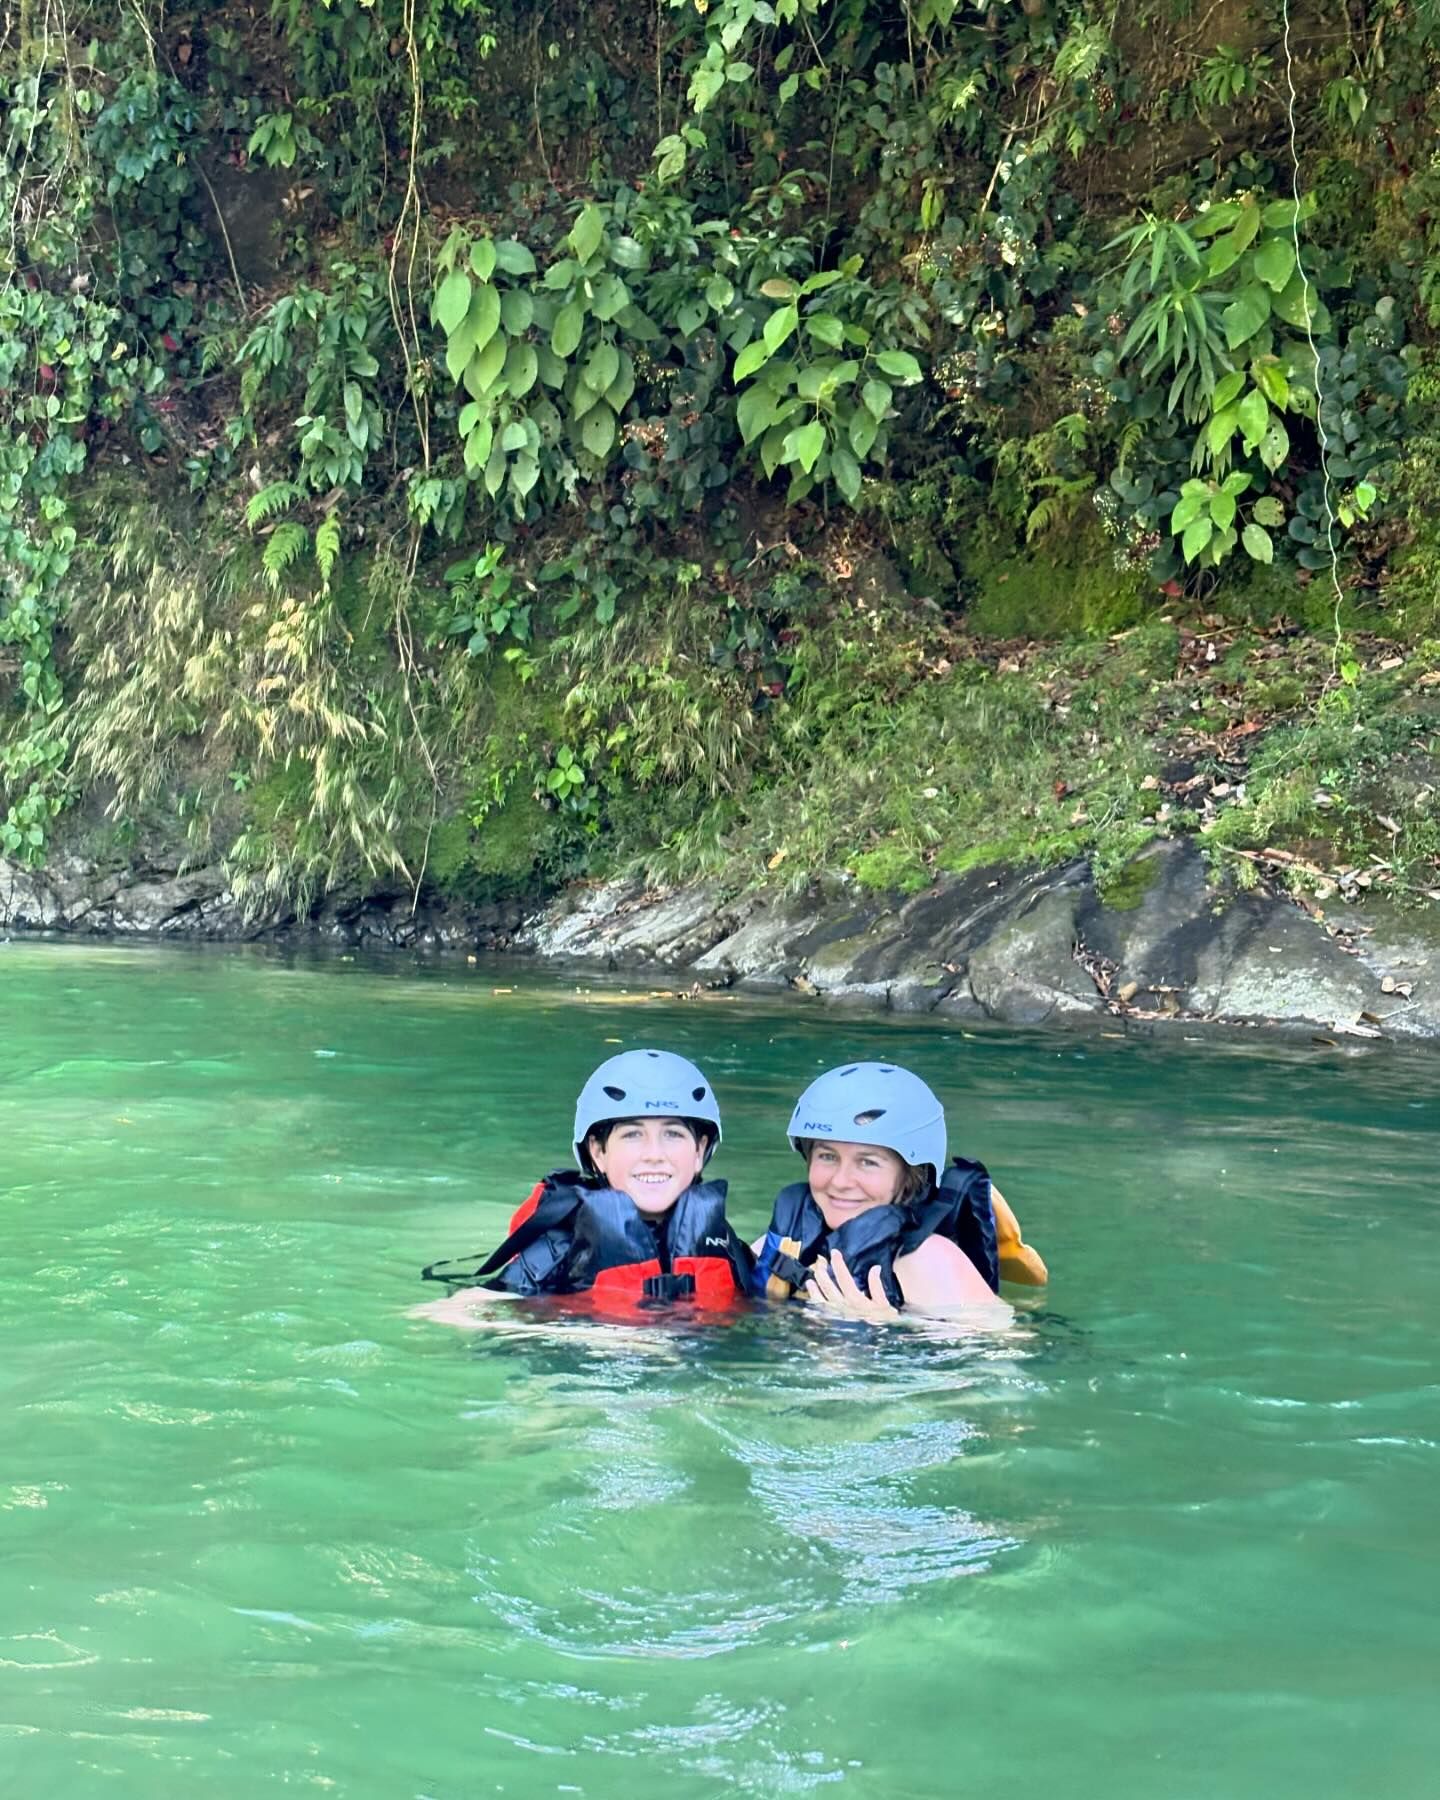 Alicia and her son Bear were life jackets as they floated in the water on their Costa Rica trip